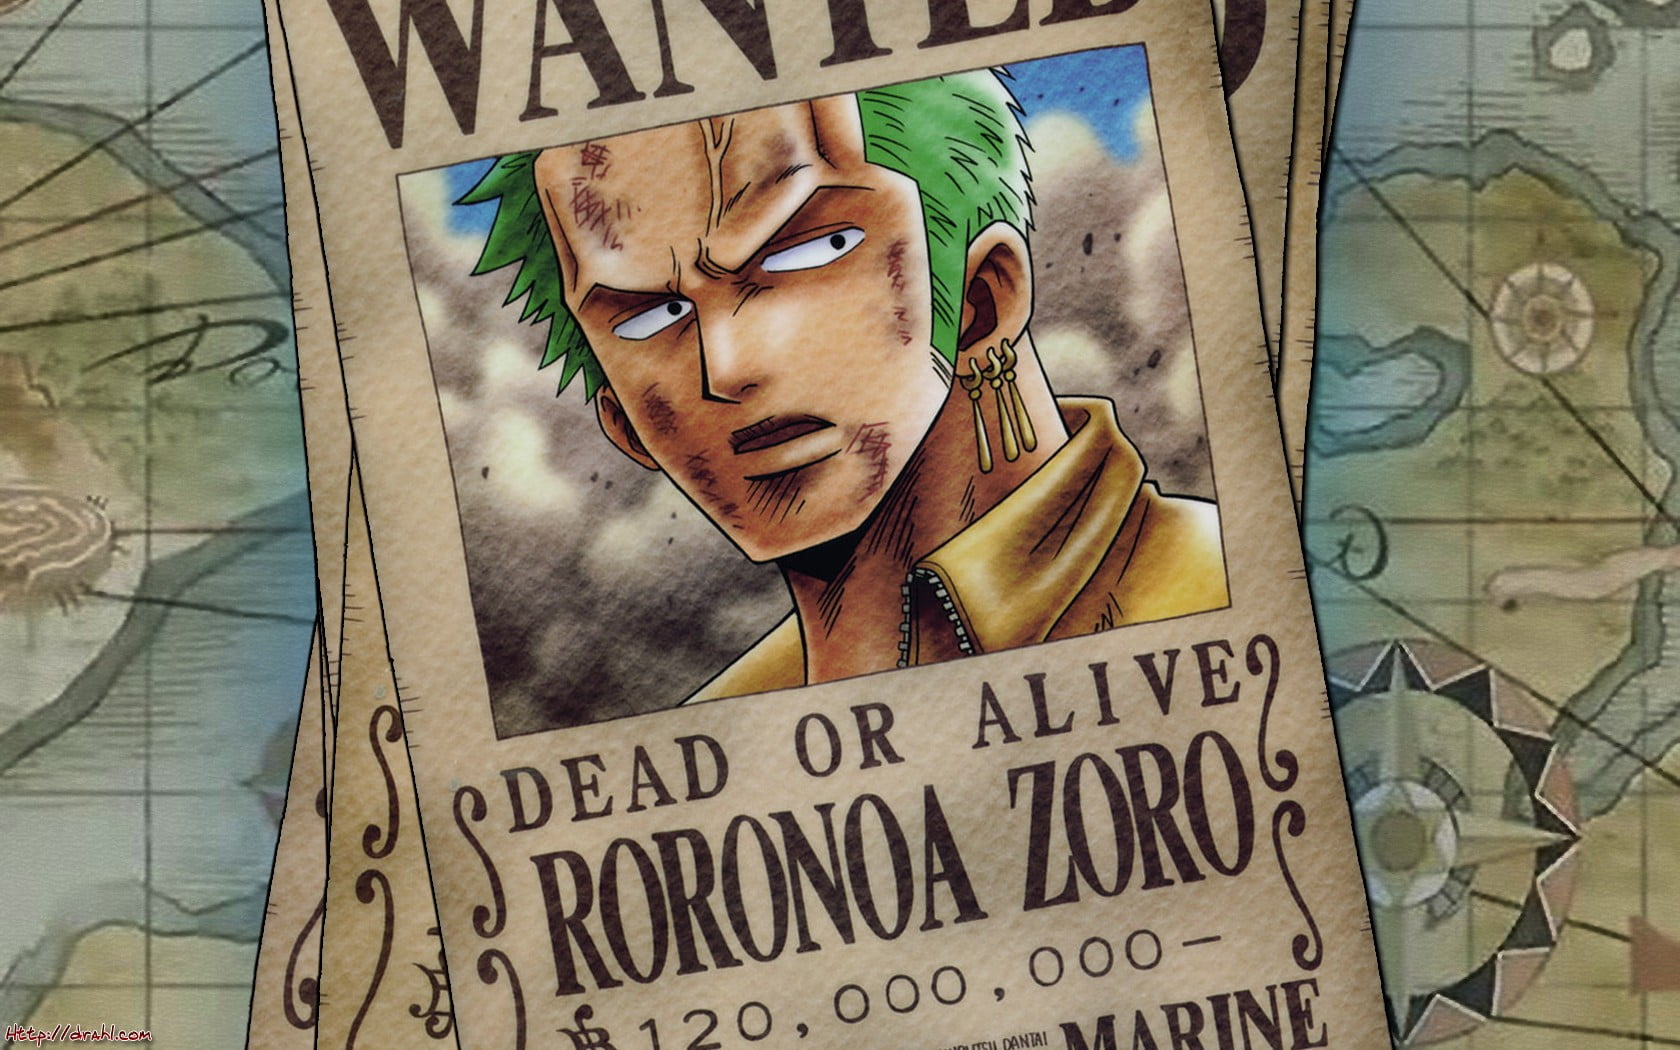 one piece wanted poster font download